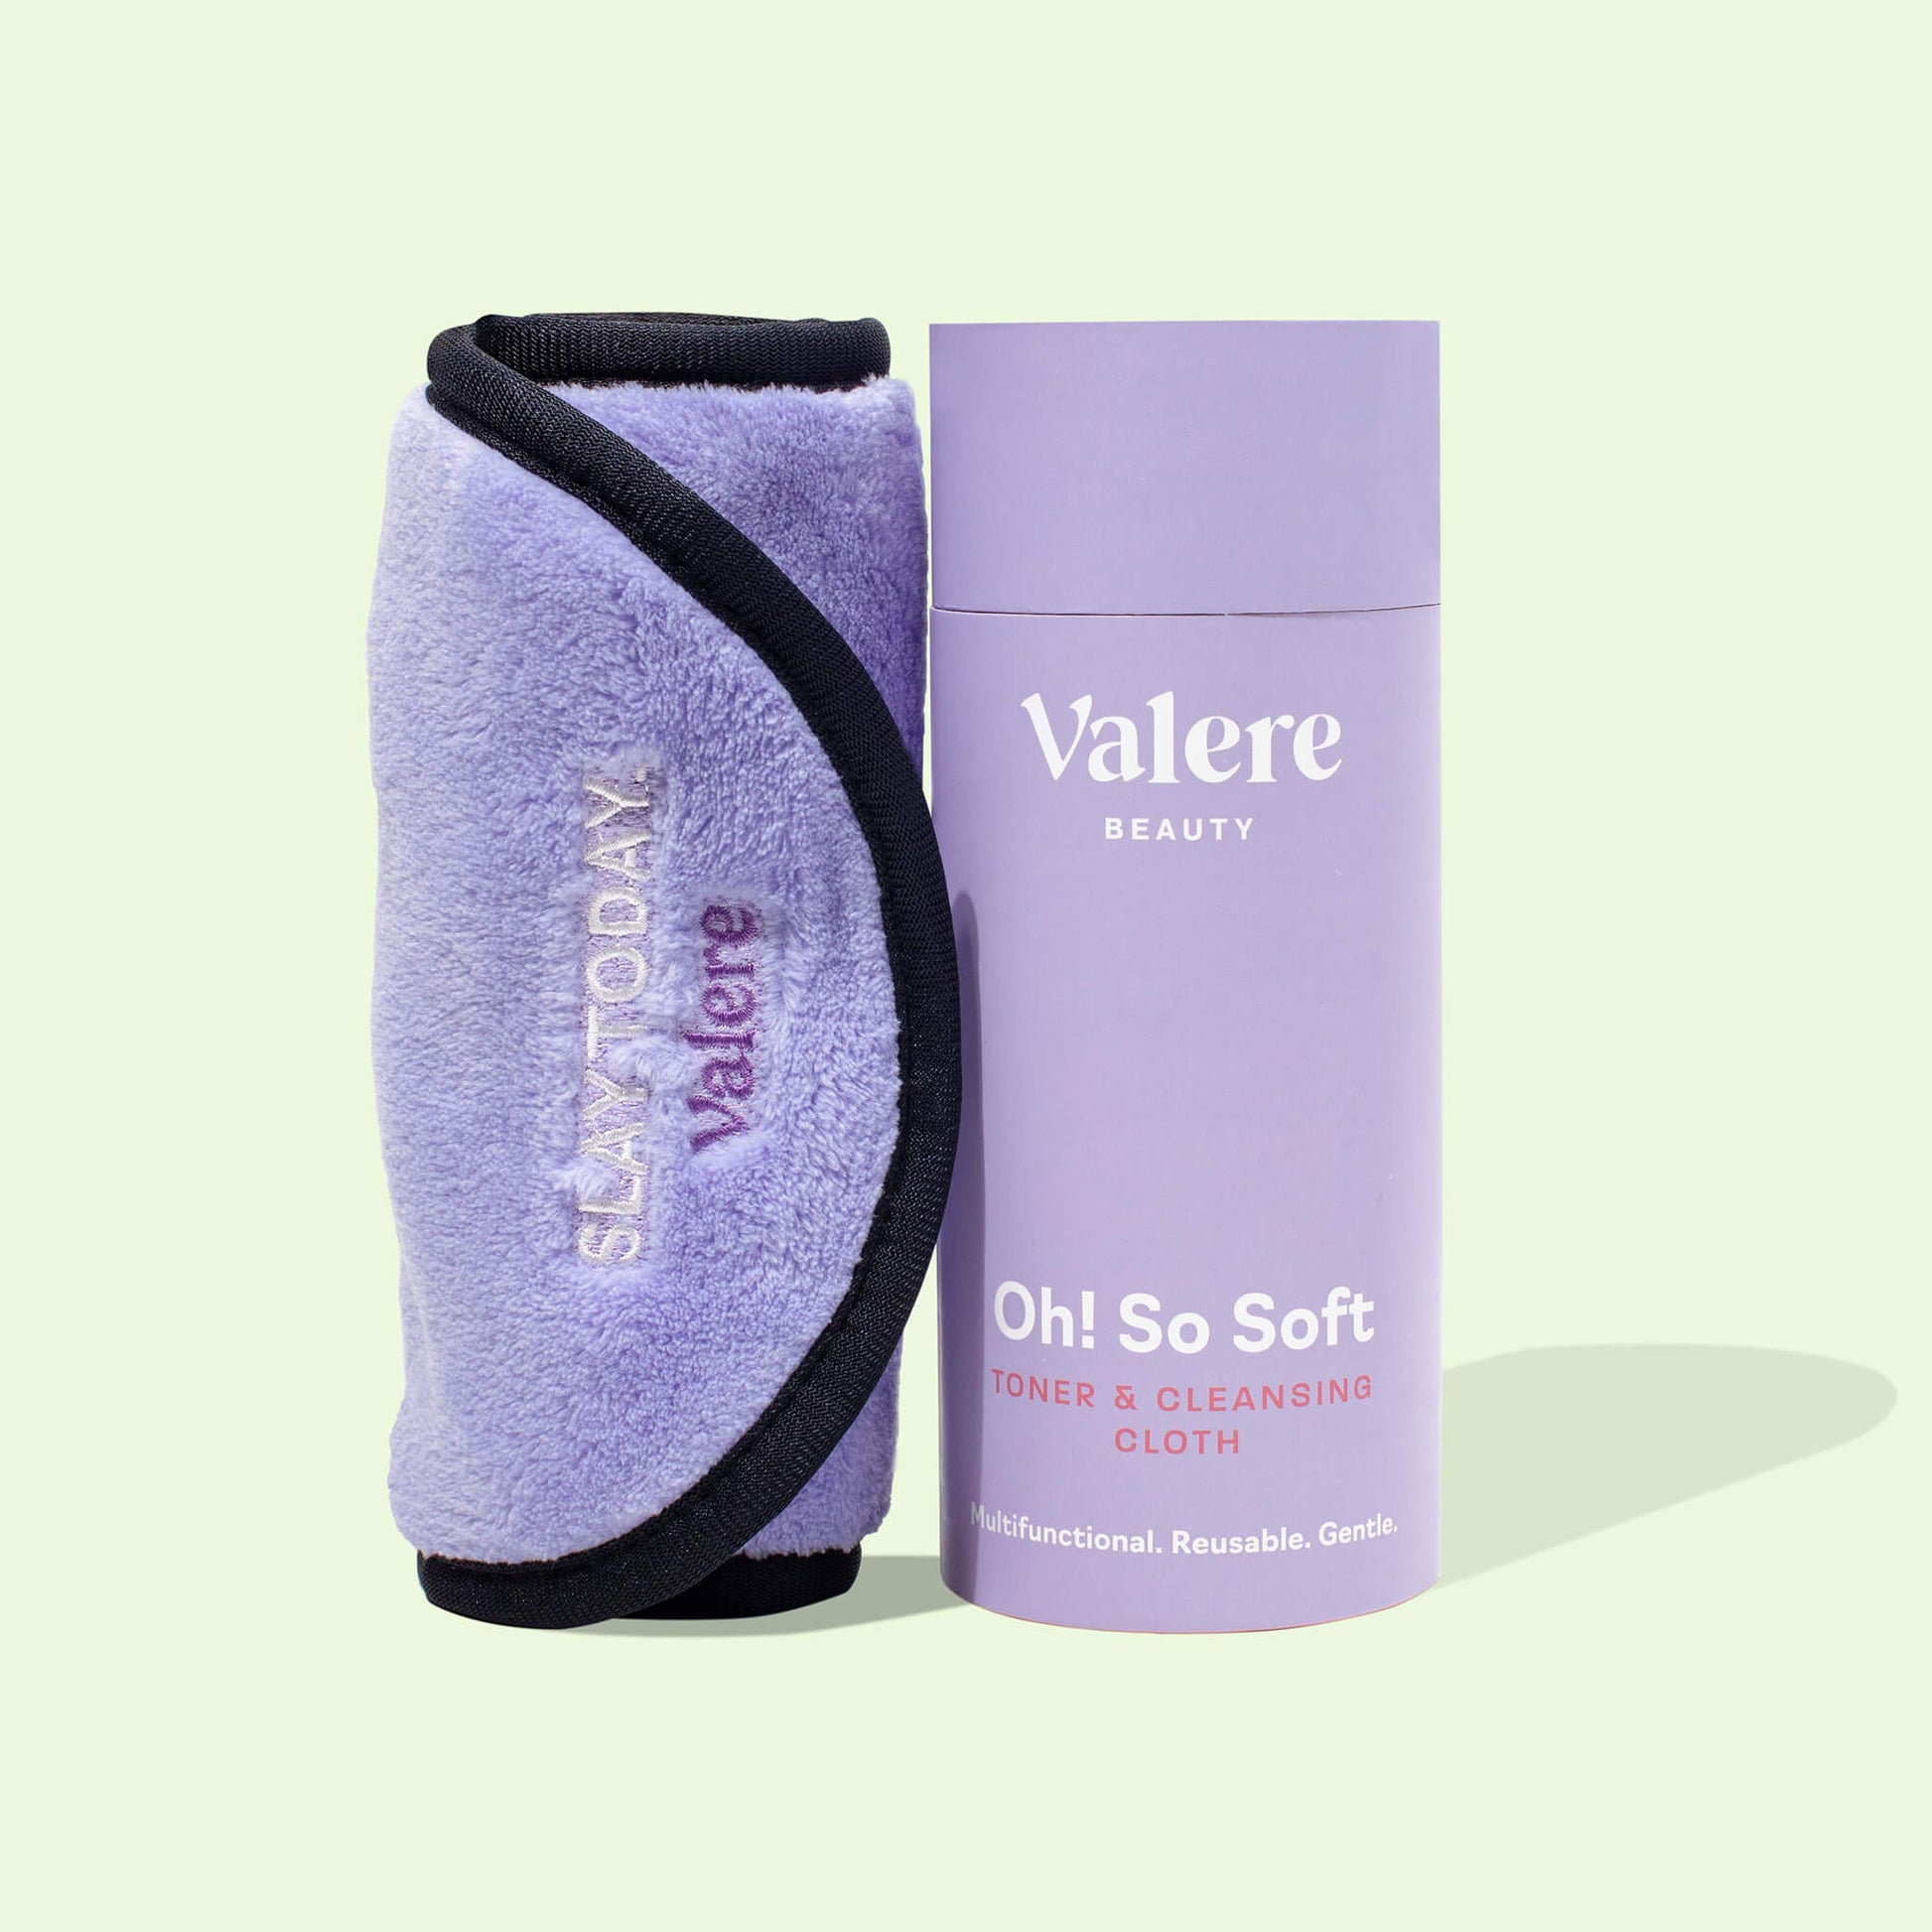 Valere Beauty Oh! So Soft Toner & Cleansing Cloth Microfiber Makeup Remover Cloth and Bamboo Cotton Toner Cloth Single Bundle 